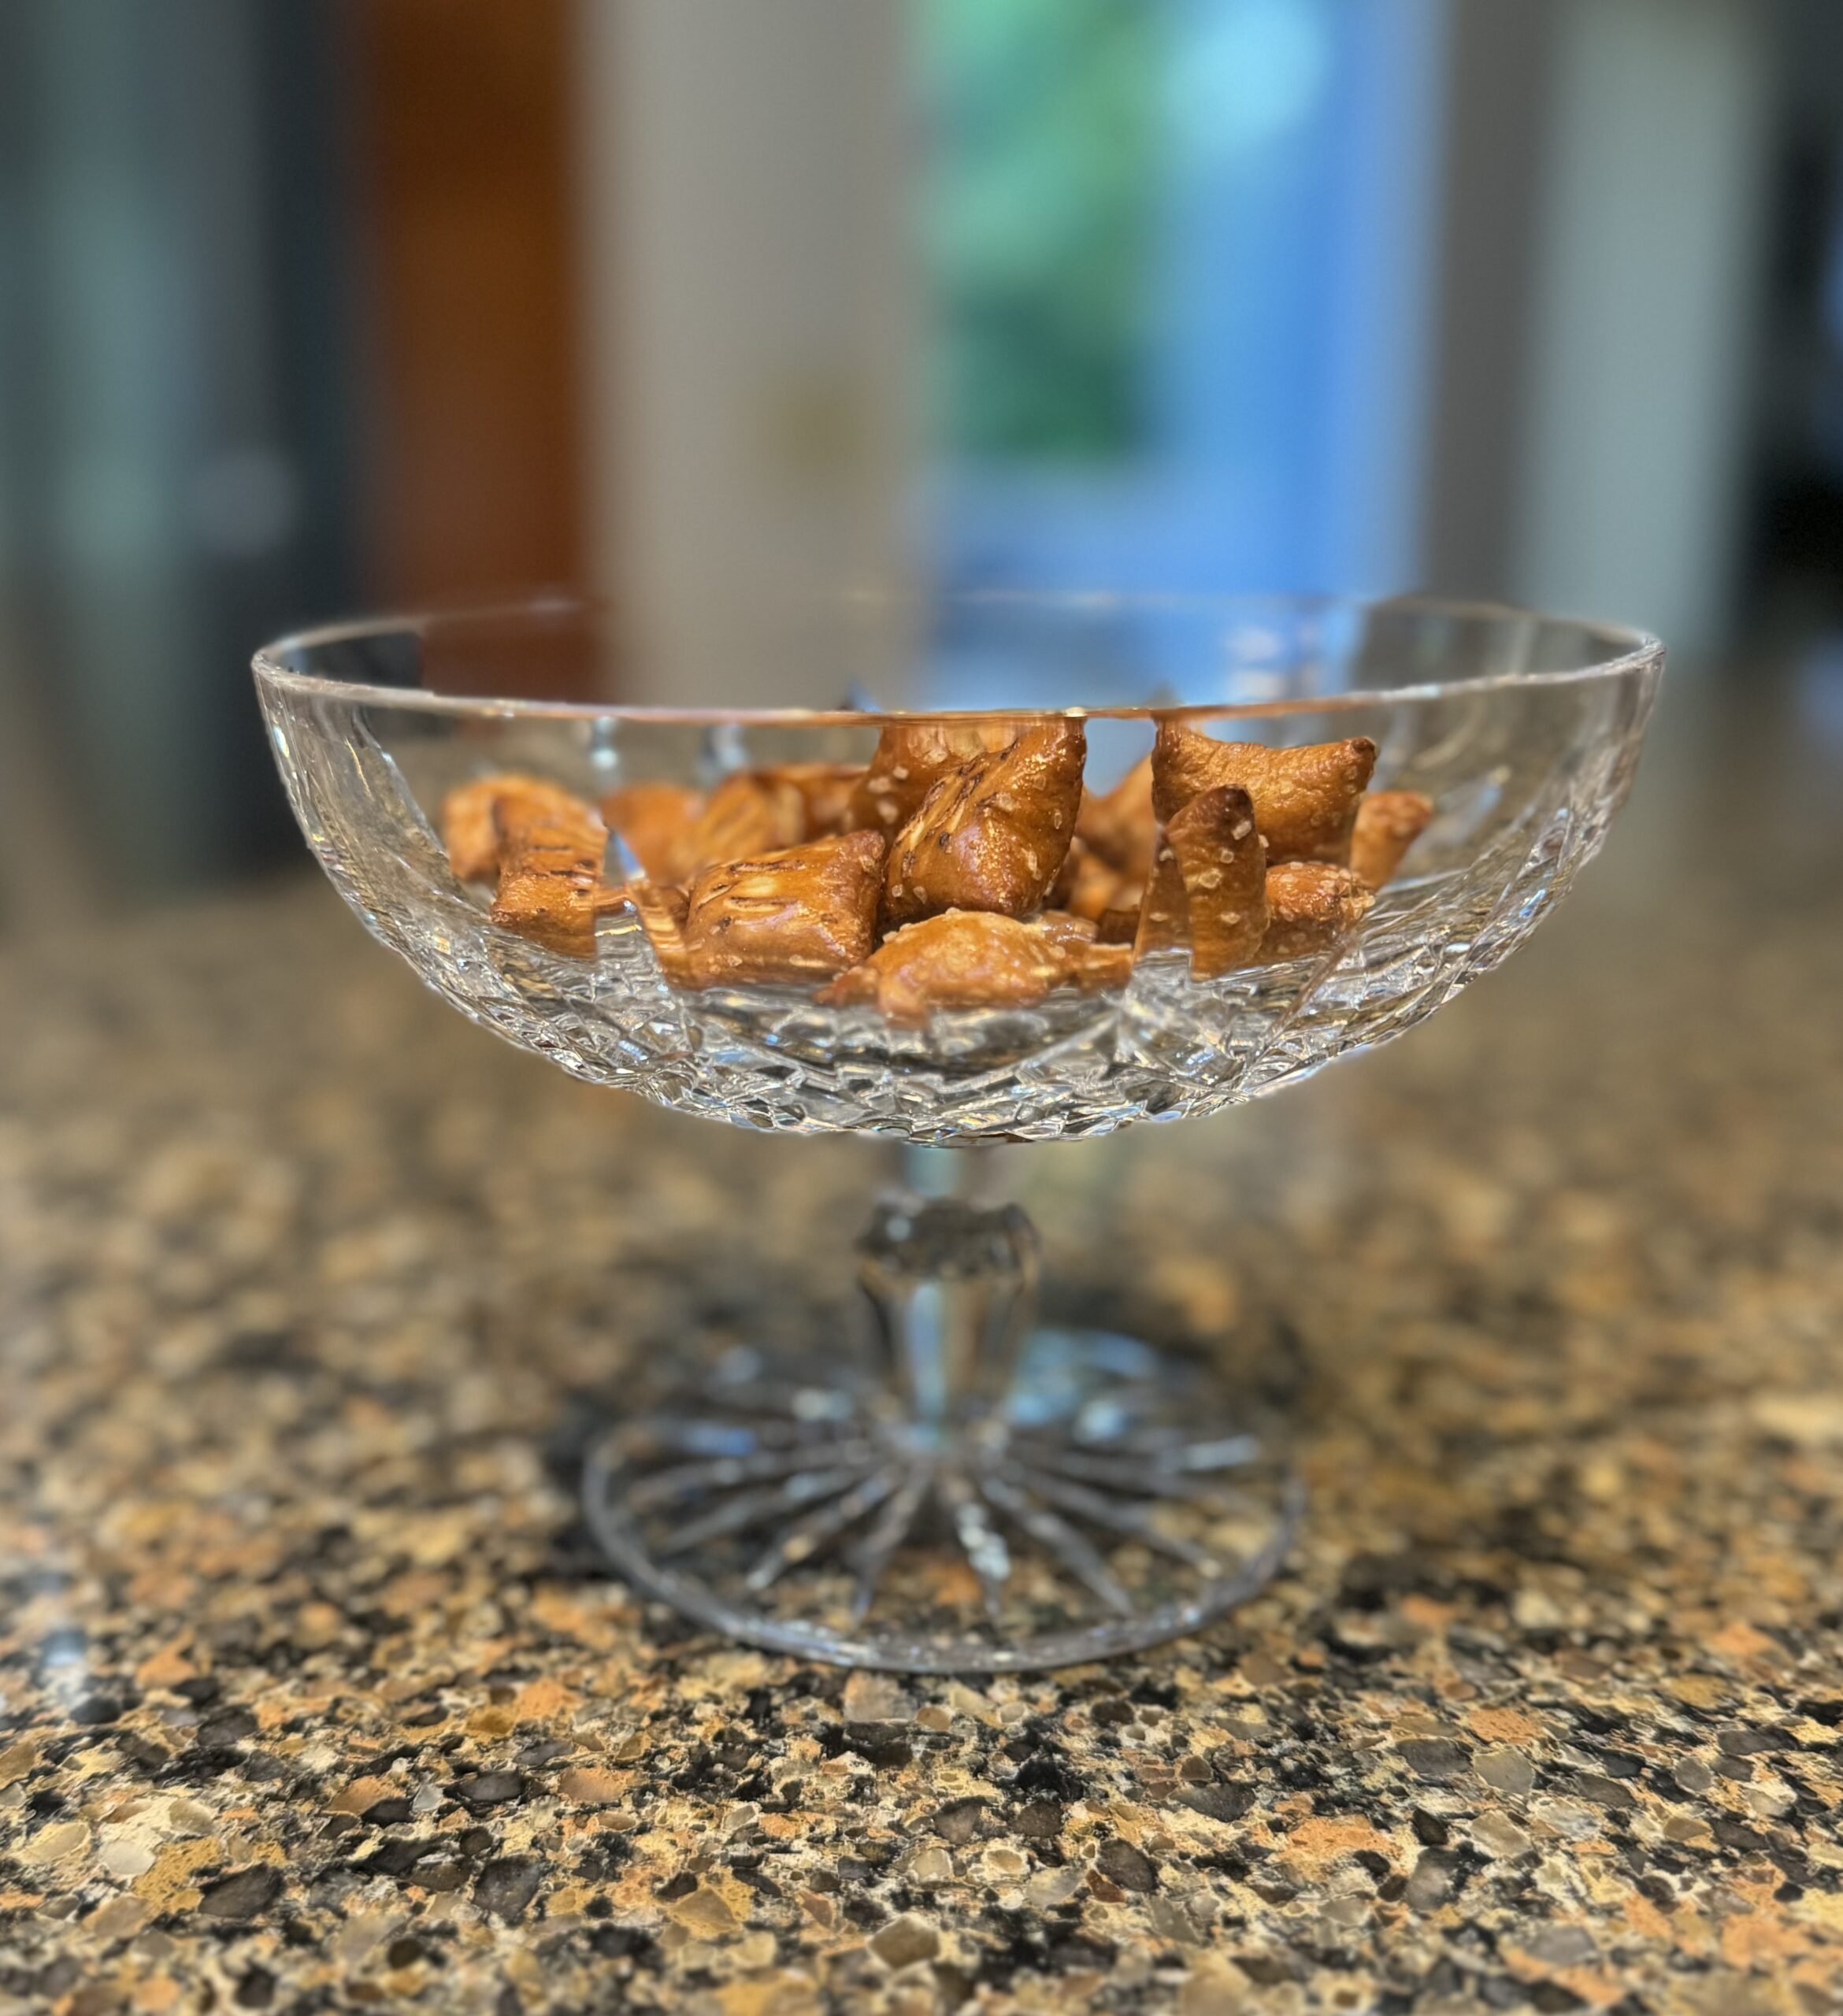 9 Reasons to Serve Peanut Butter Pretzels in a Waterford Bowl